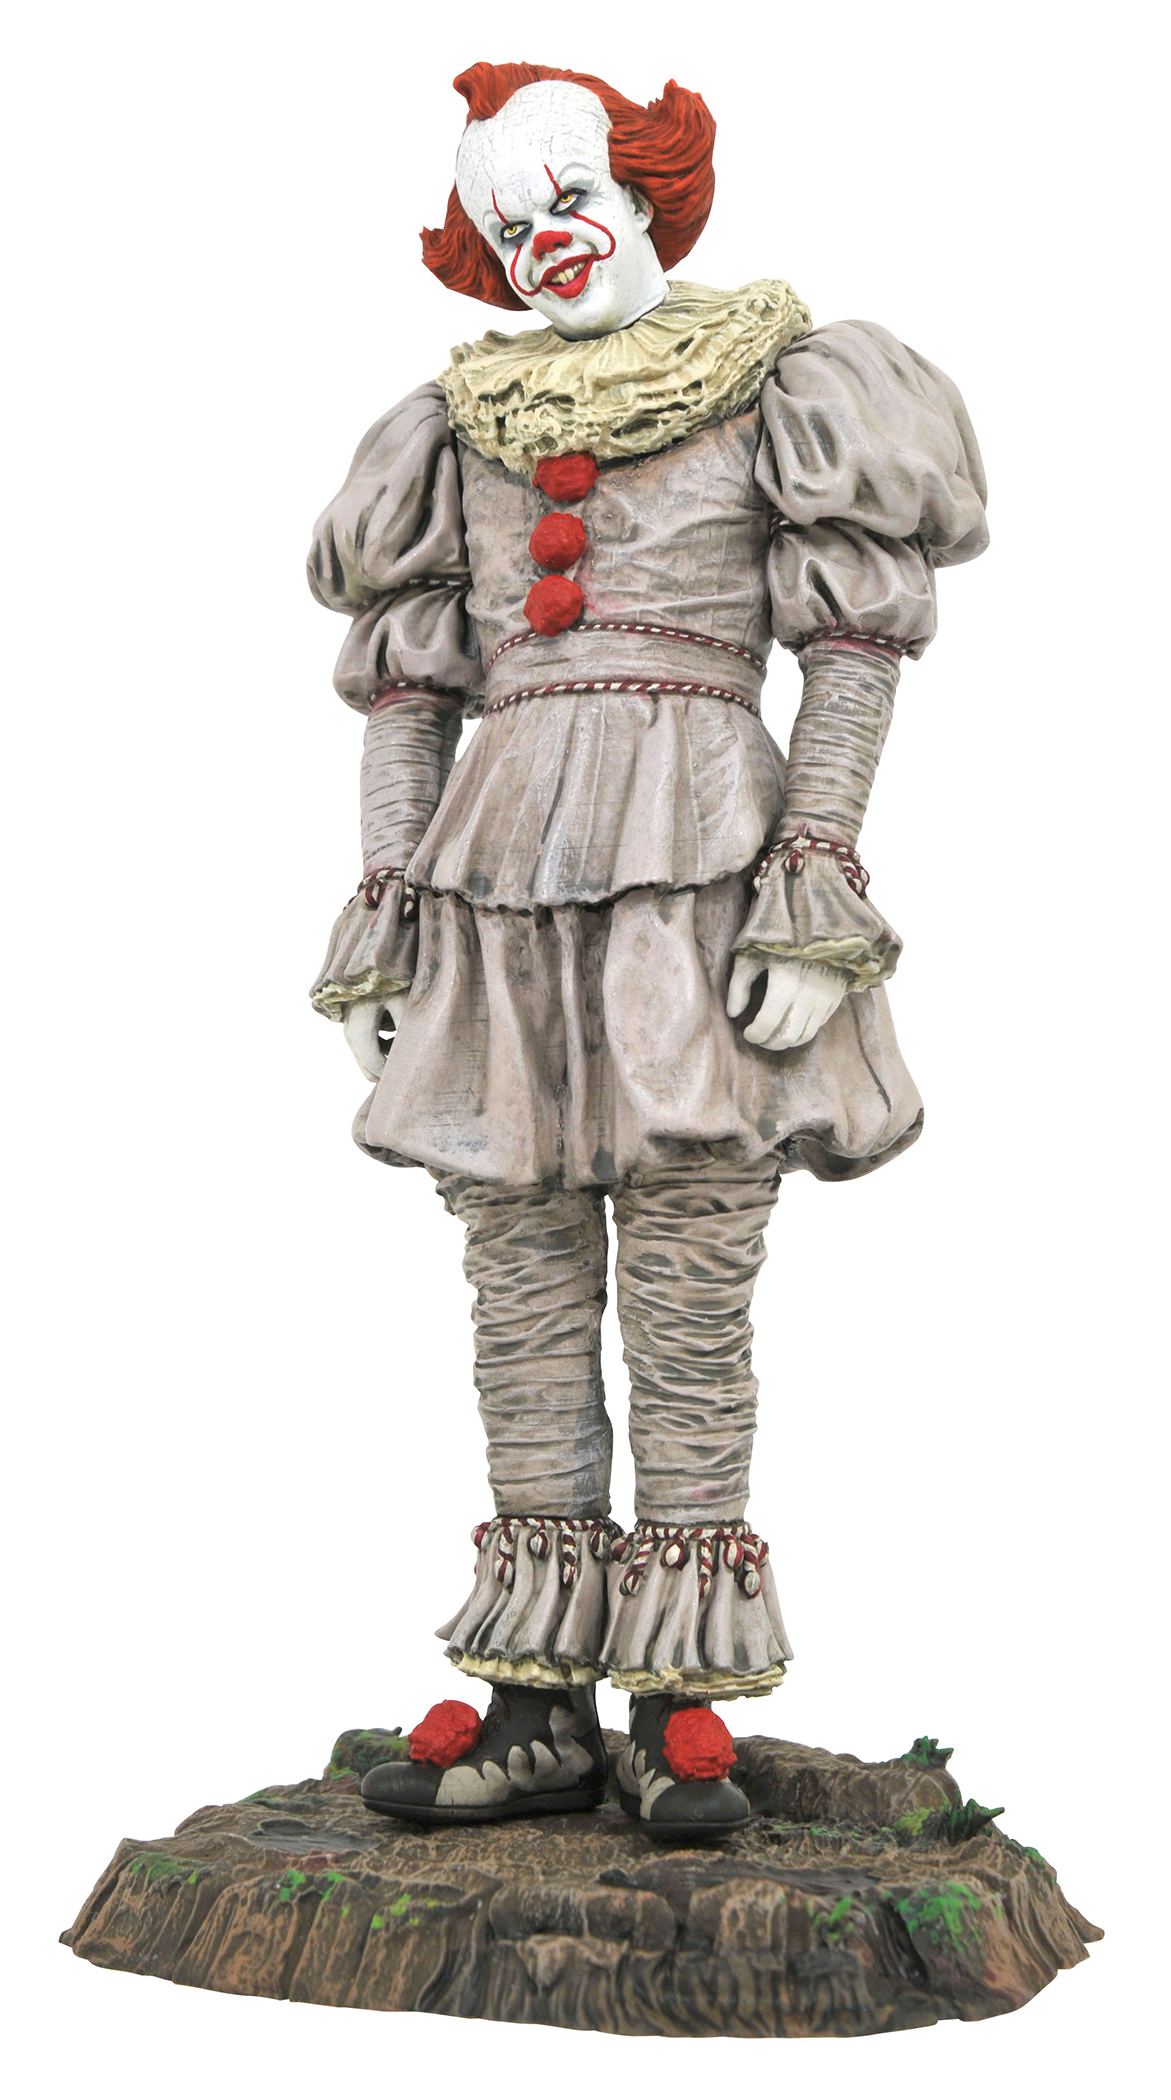 It 2 Gallery Pennywise Swamp PVC Statue